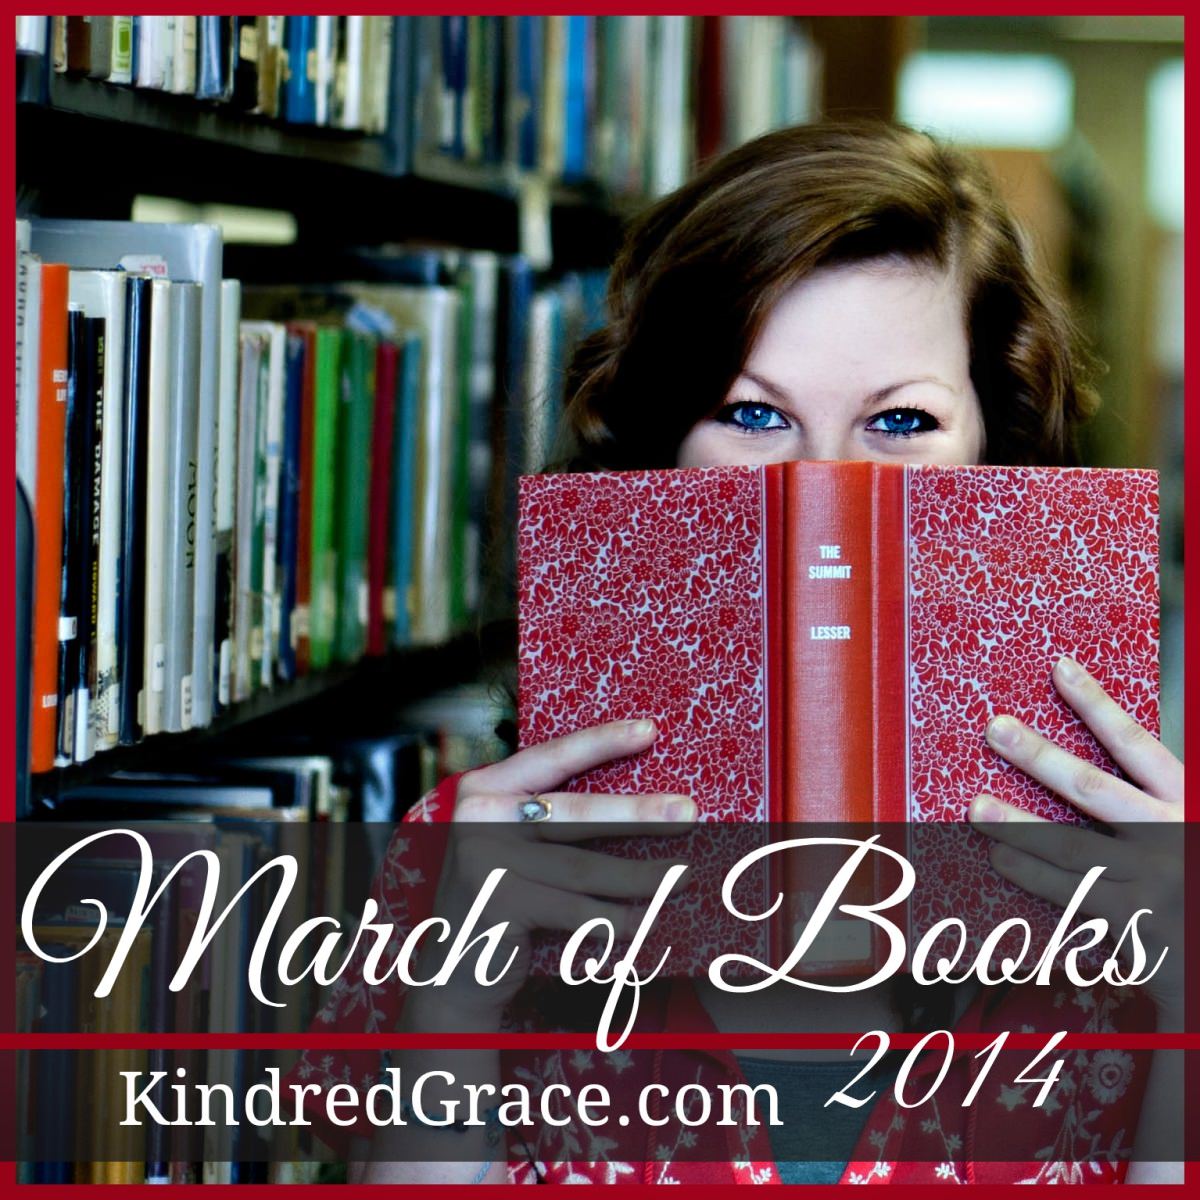 Welcome to the 5th Annual March of Books